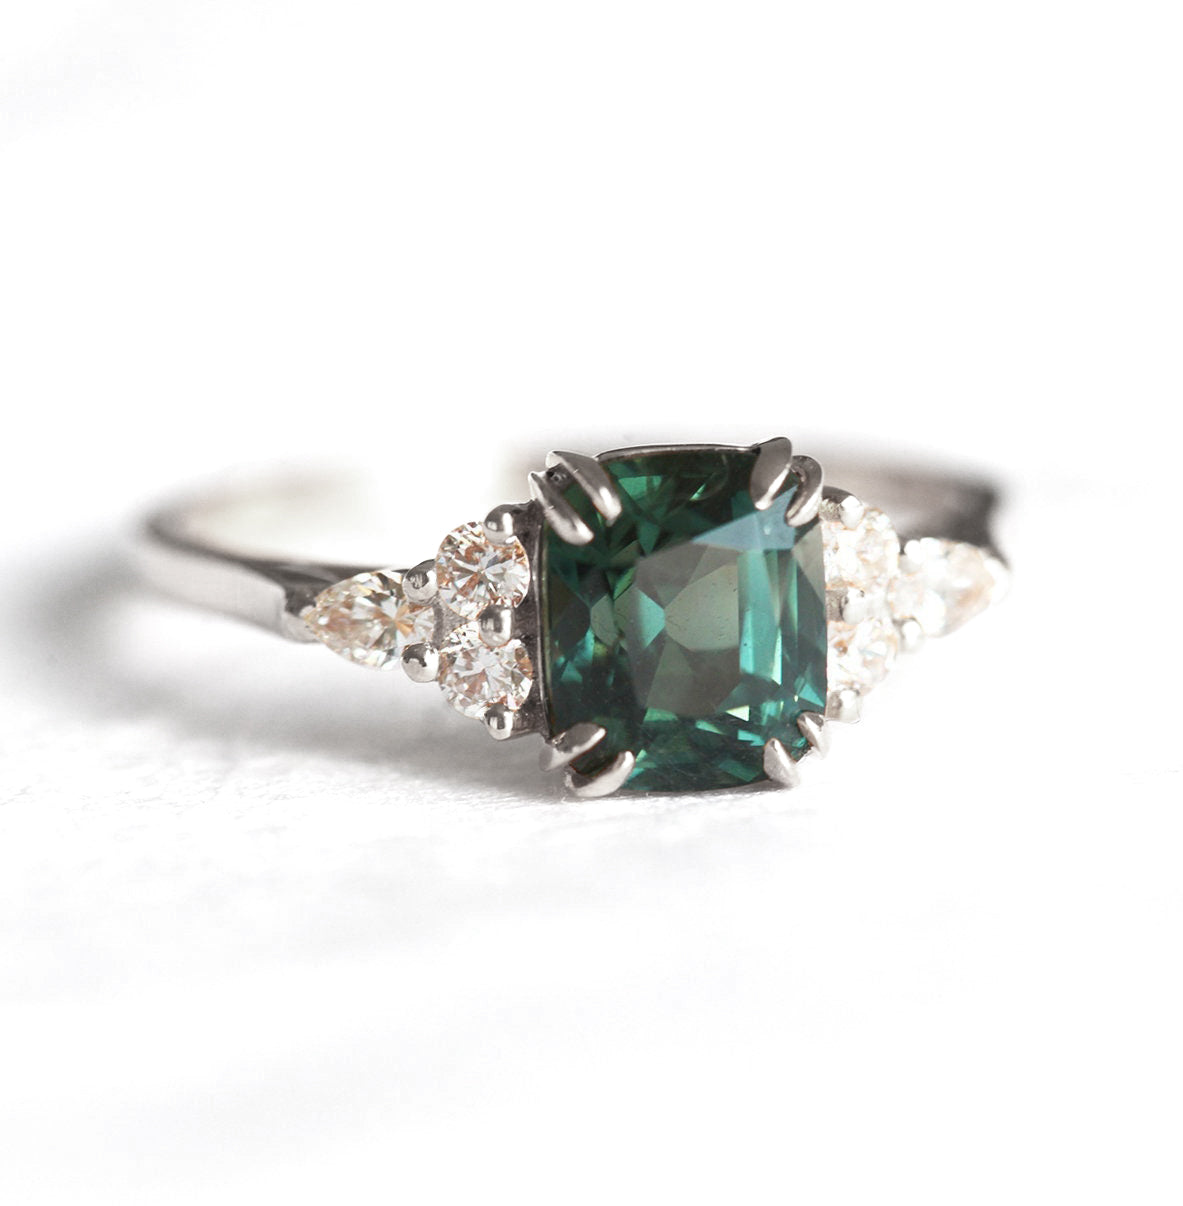 Cushion-cut teal sapphire cluster ring with diamonds